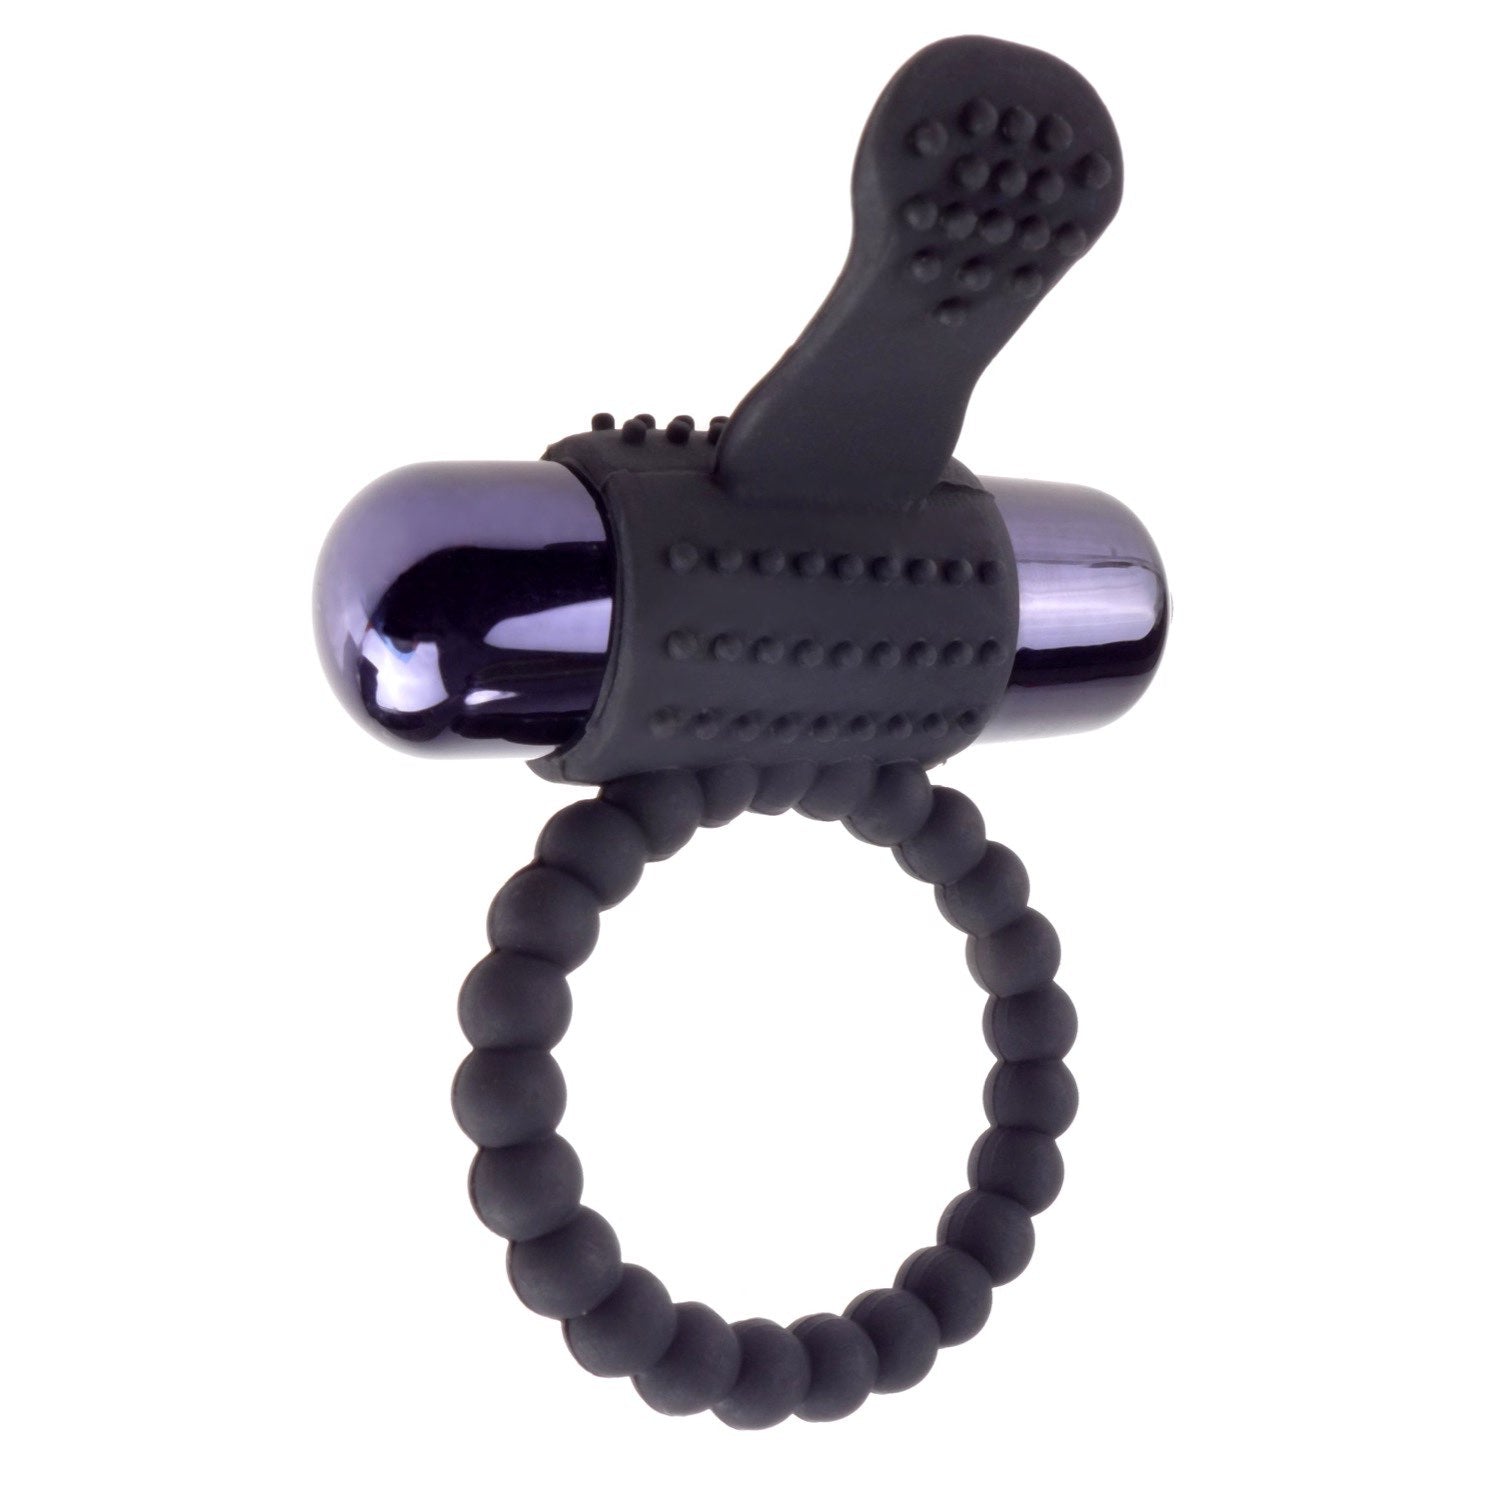 Fantasy C-Ringz Vibrating Silicone Super Ring - Black Vibrating Cock Ring by Pipedream